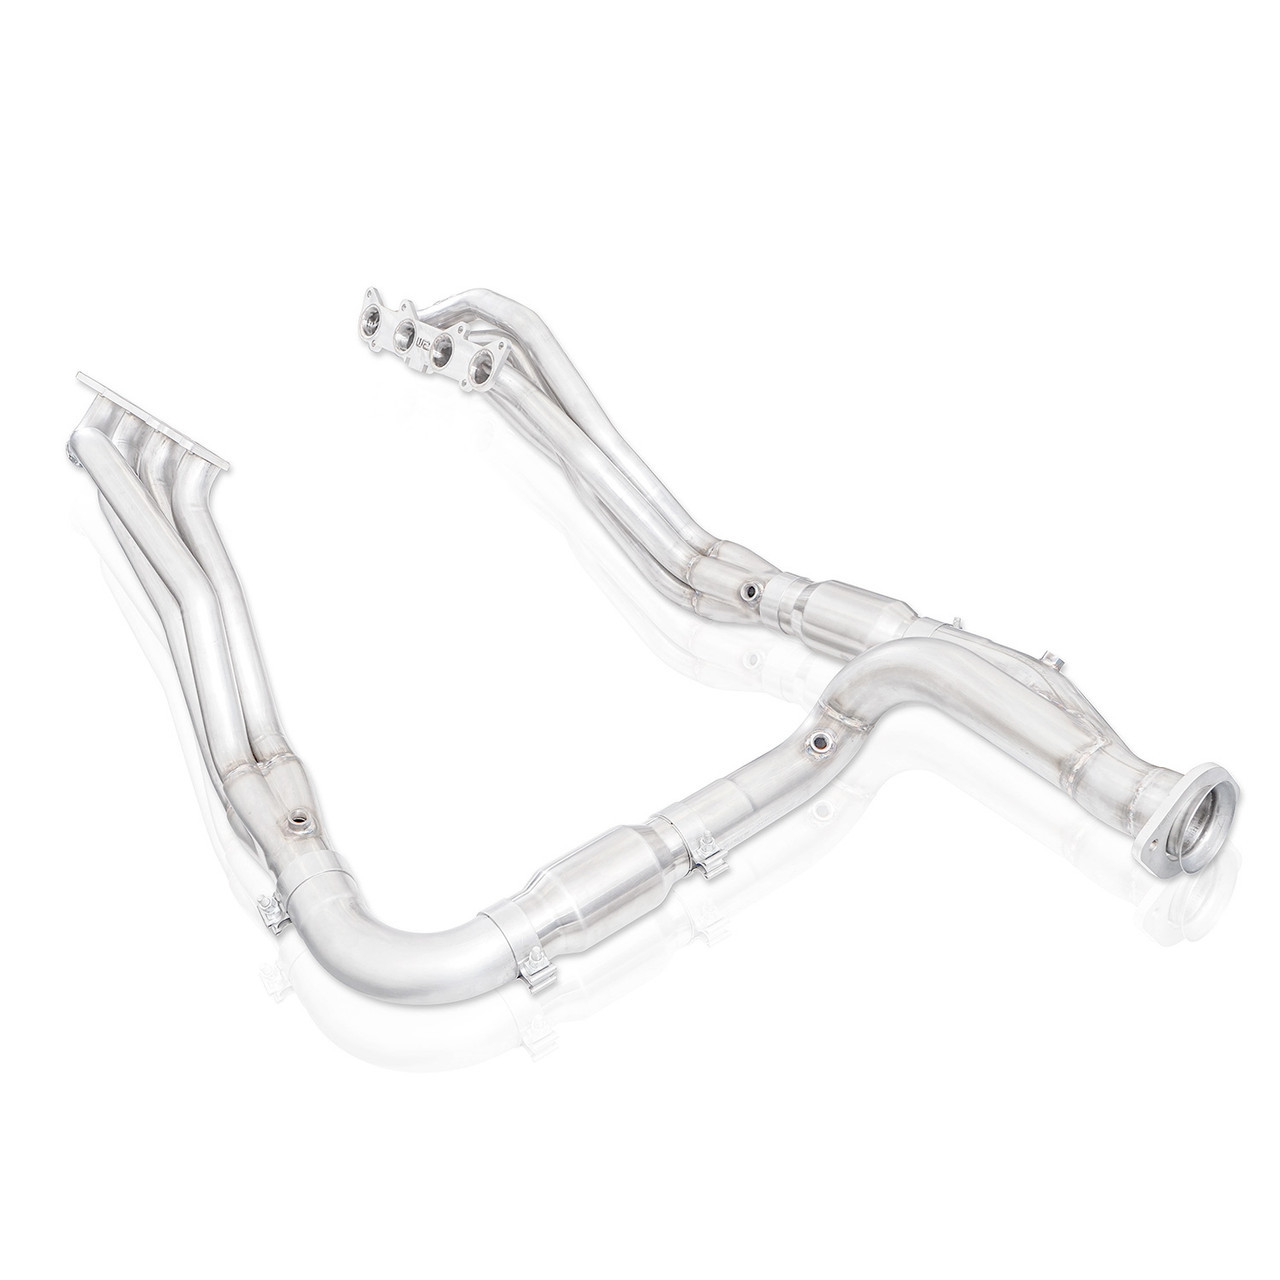 Stainless Works FT18HCAT Headers, Long Tube, 1-7/8 in Primary, 3 in Collector, Catalytic Converters Included, Stainless, Natural, Stainless Works Exhaust, Ford Modular, Ford Fullsize Truck 2015-20, Kit